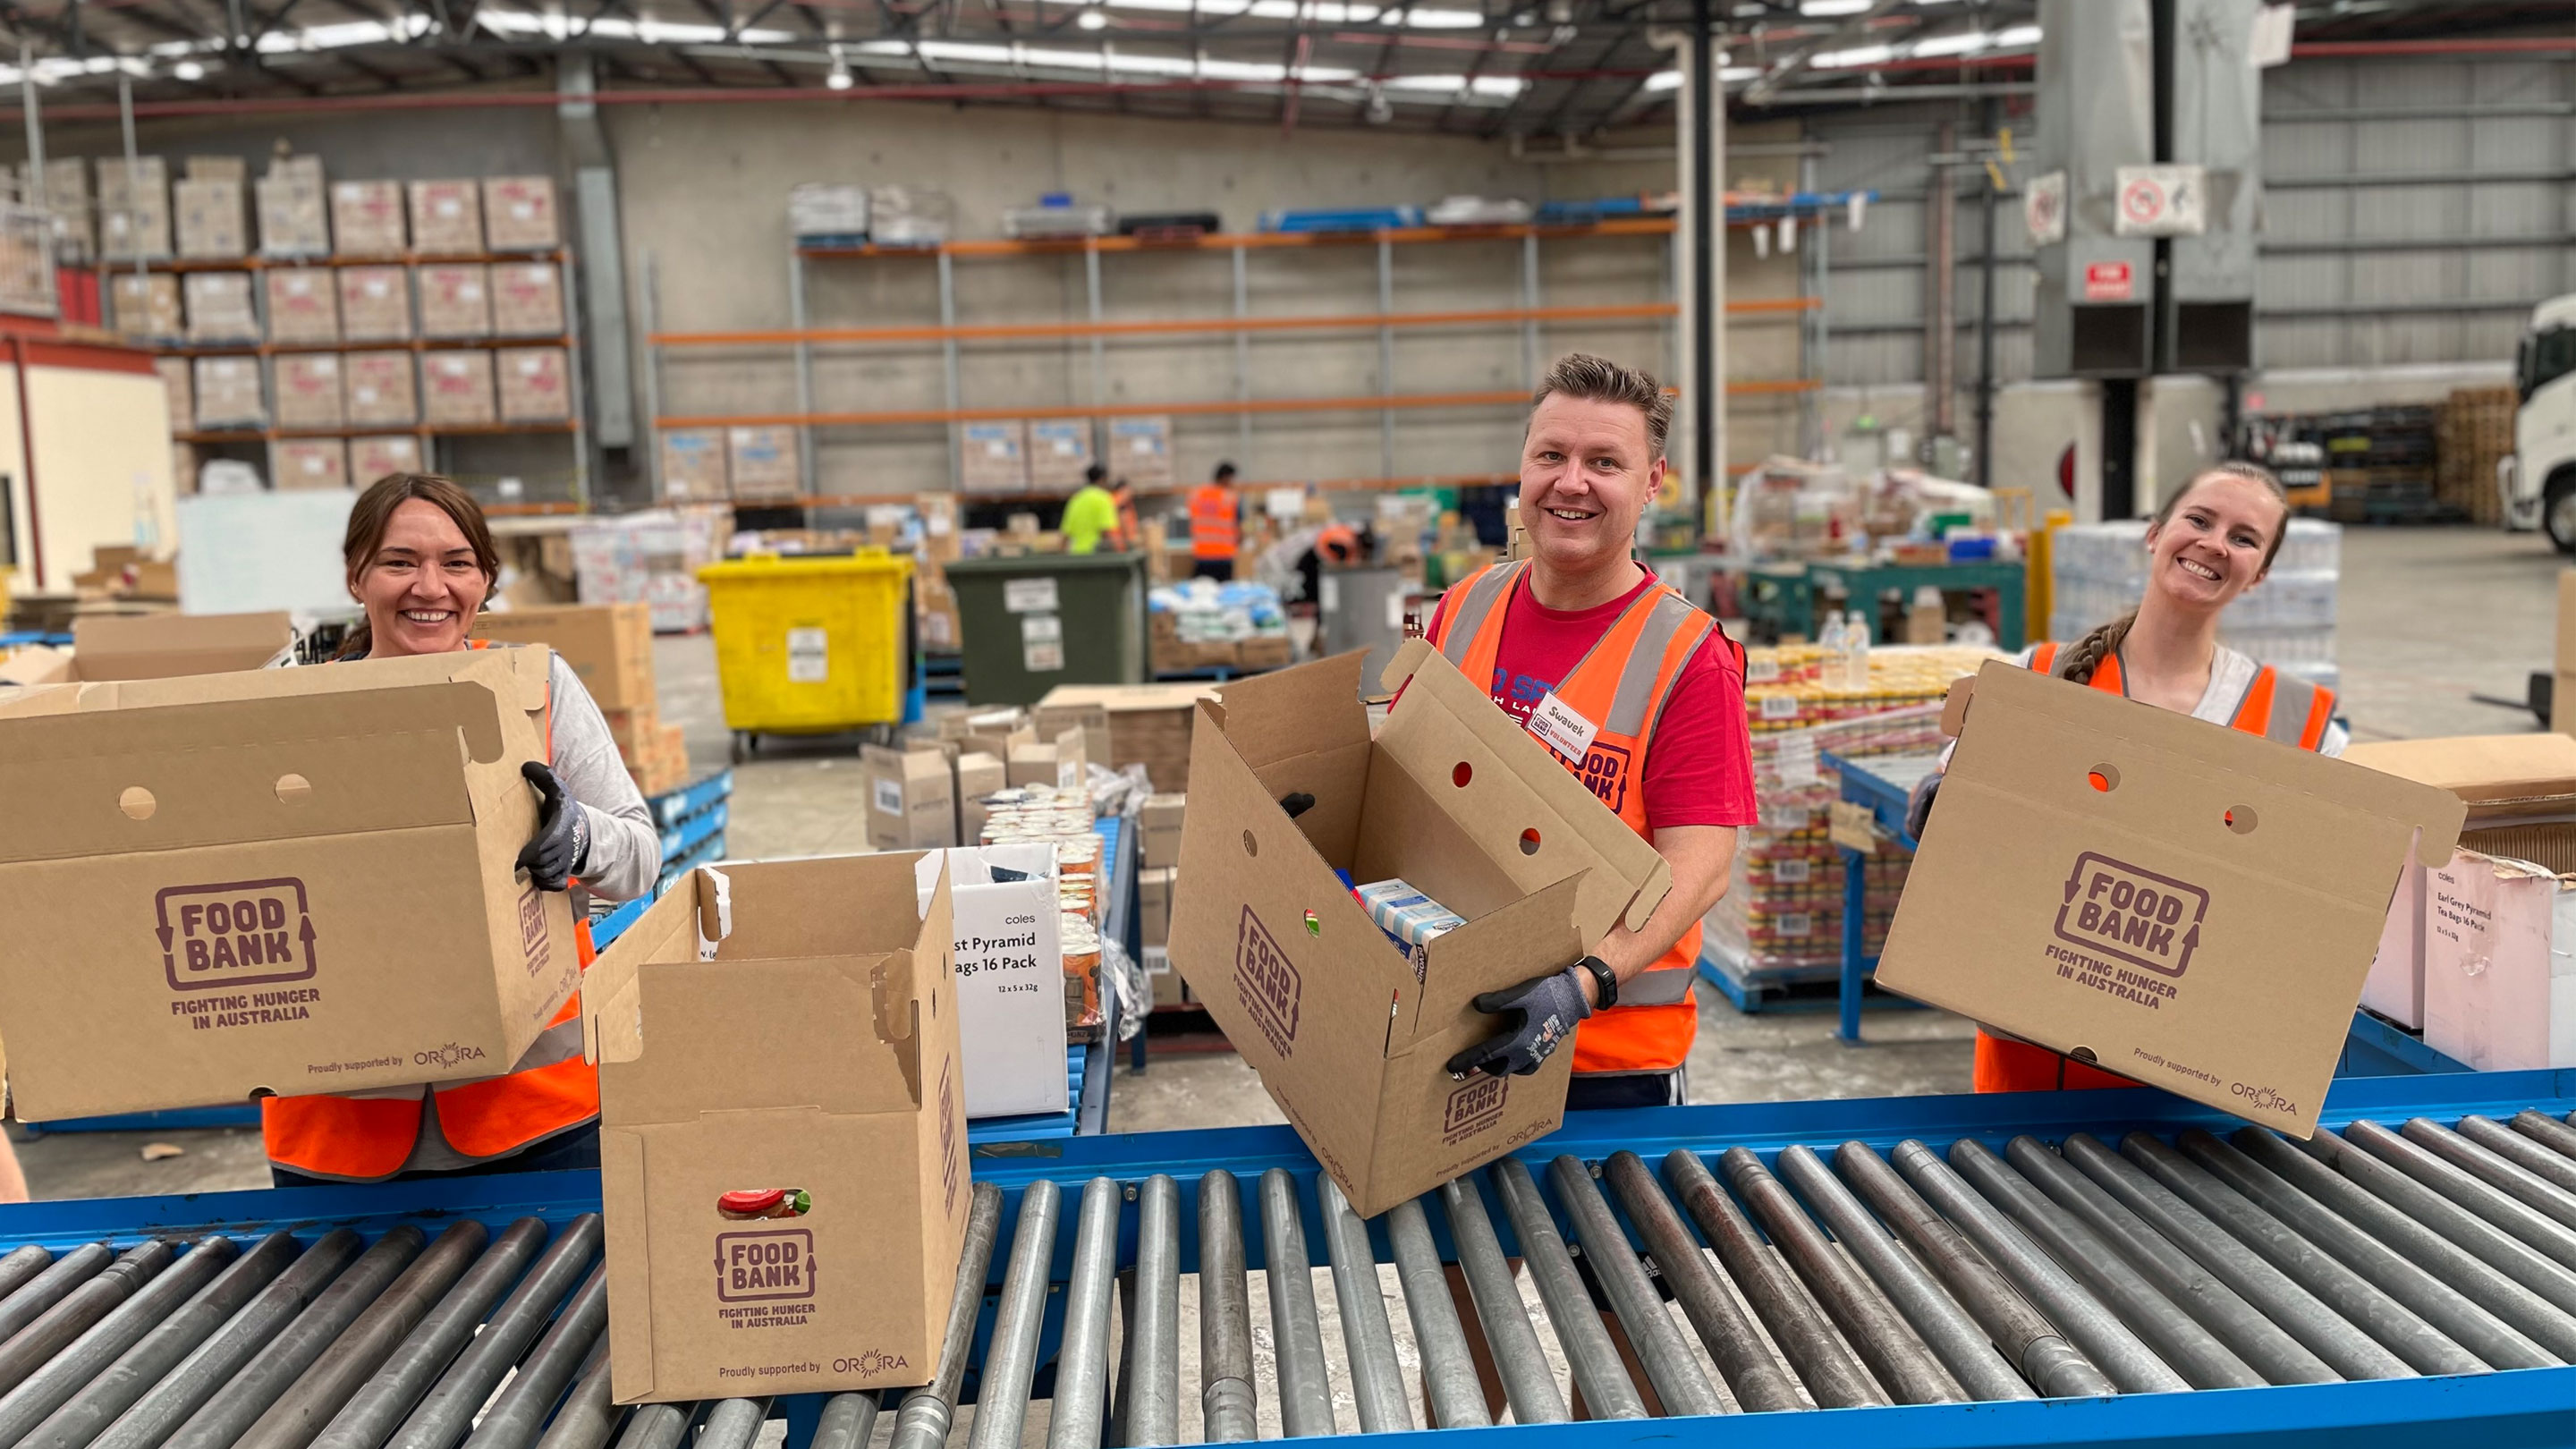 So far this year, 33 of our team members have participated in five volunteering days, packing food to be sent to charities and community groups across Victoria.